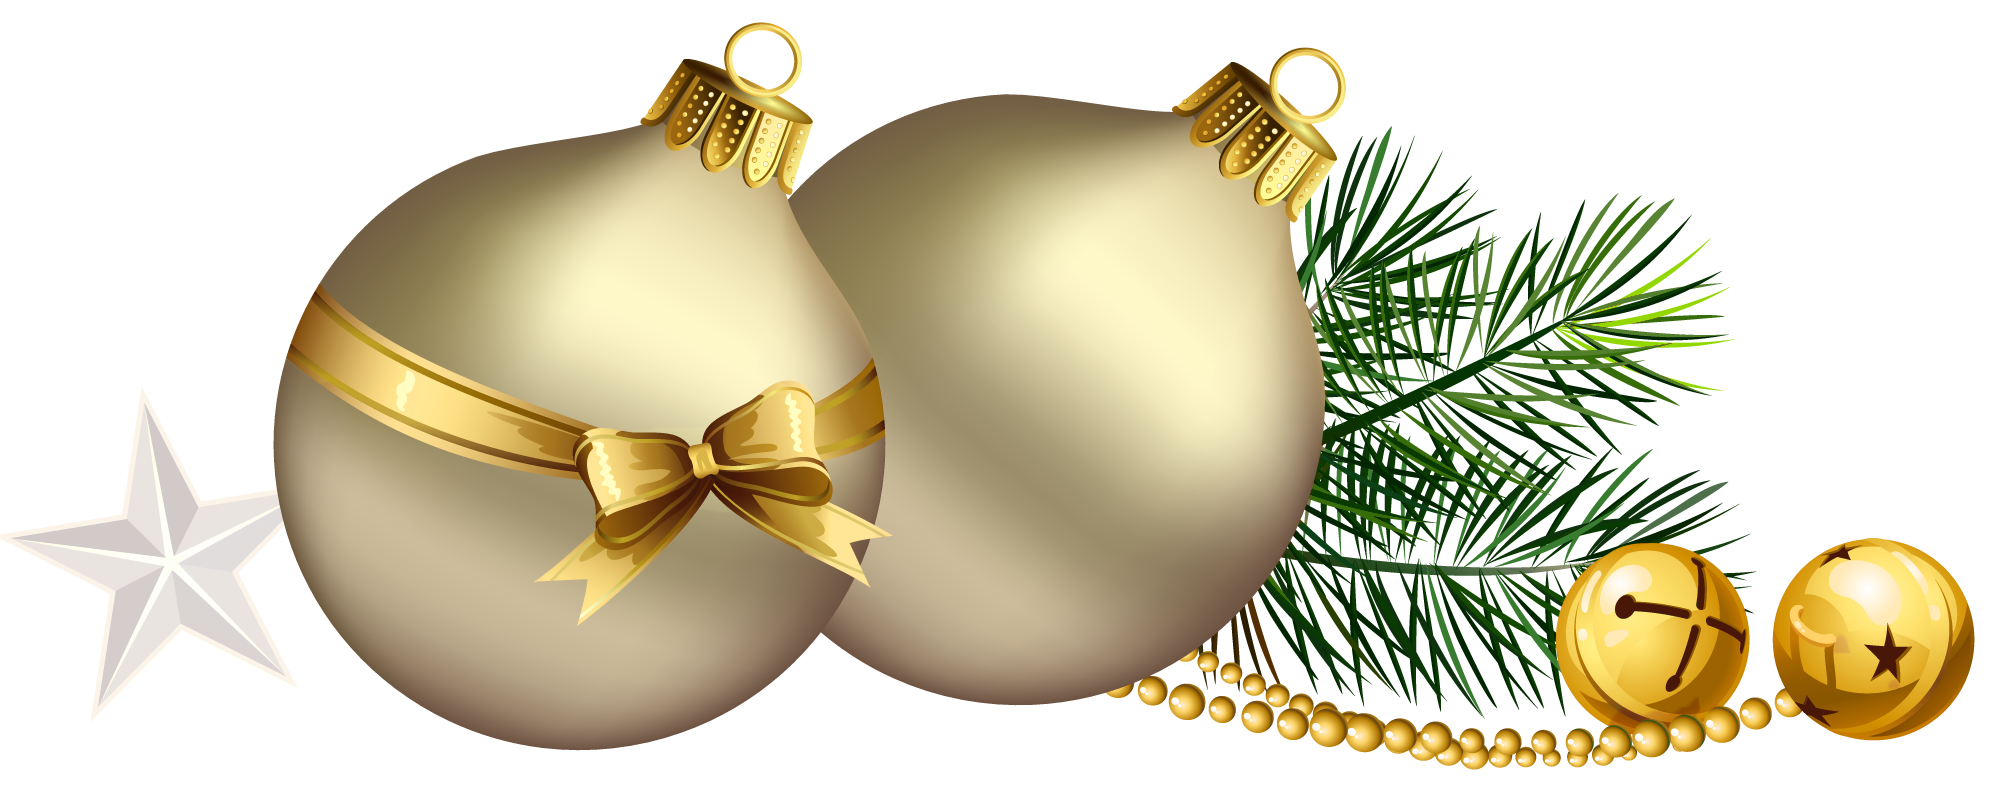 Christmas star christmas balls with pine branch and star clipart 0